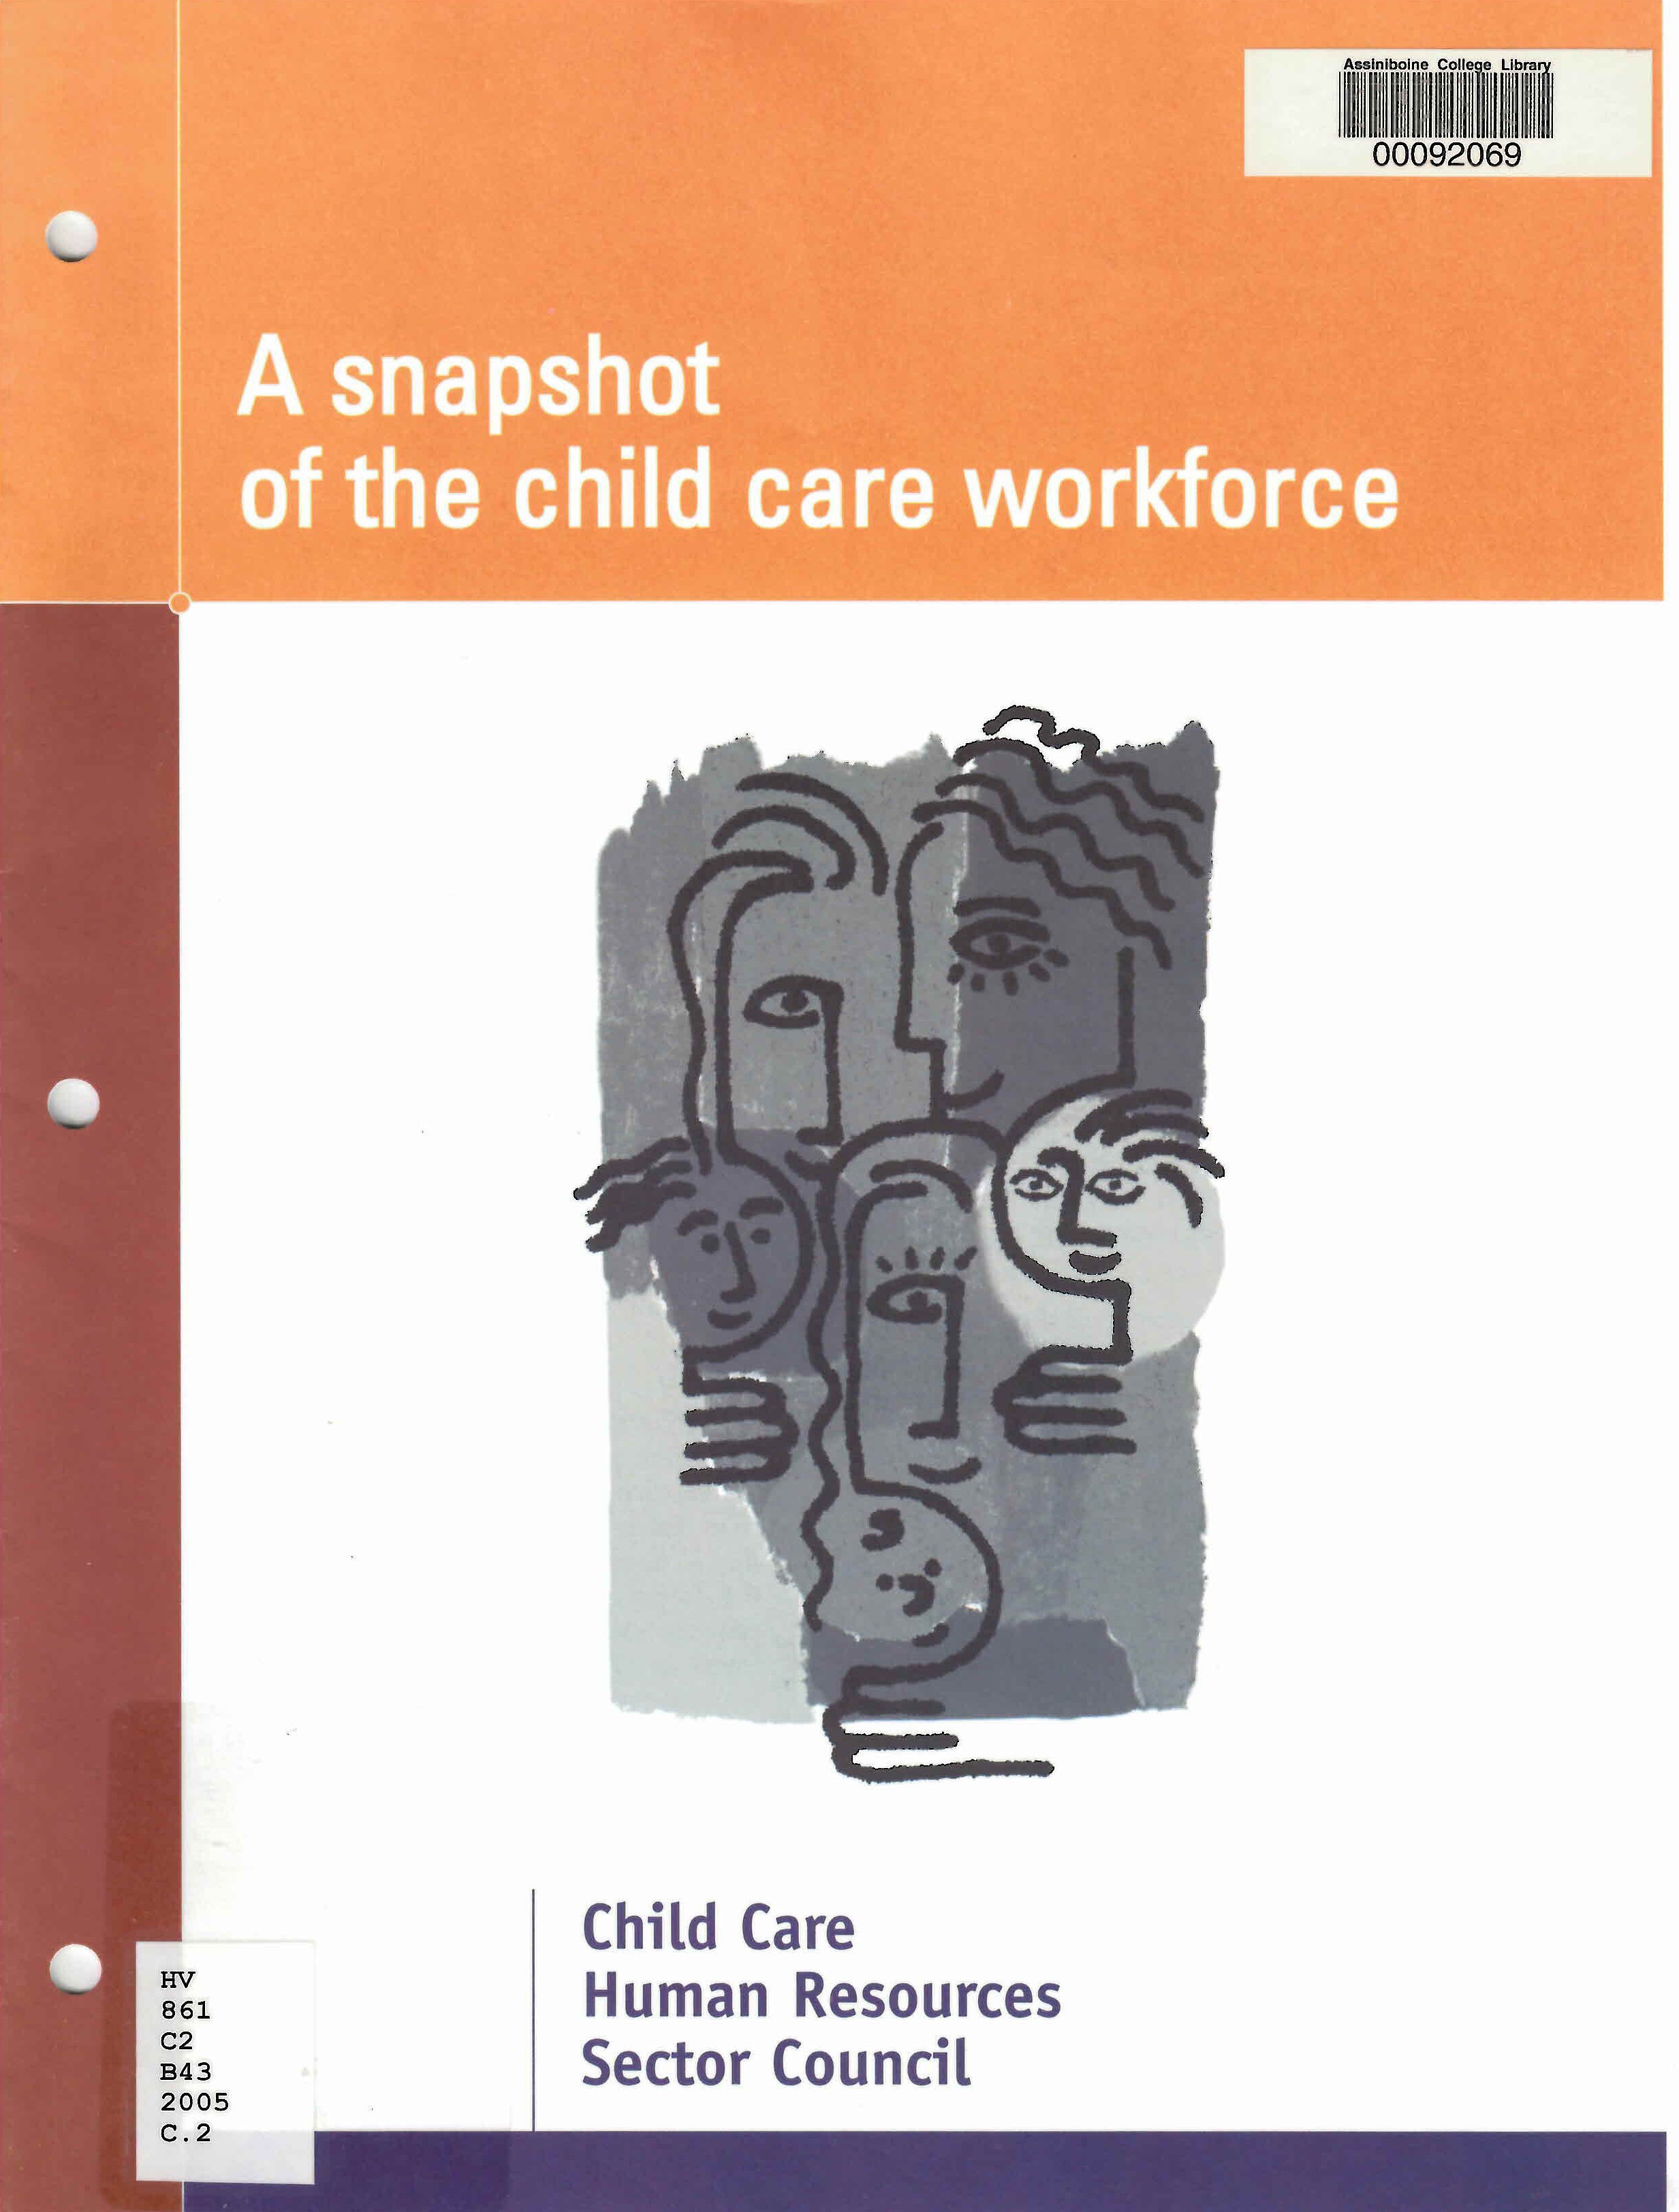 A snapshot of the child care workforce